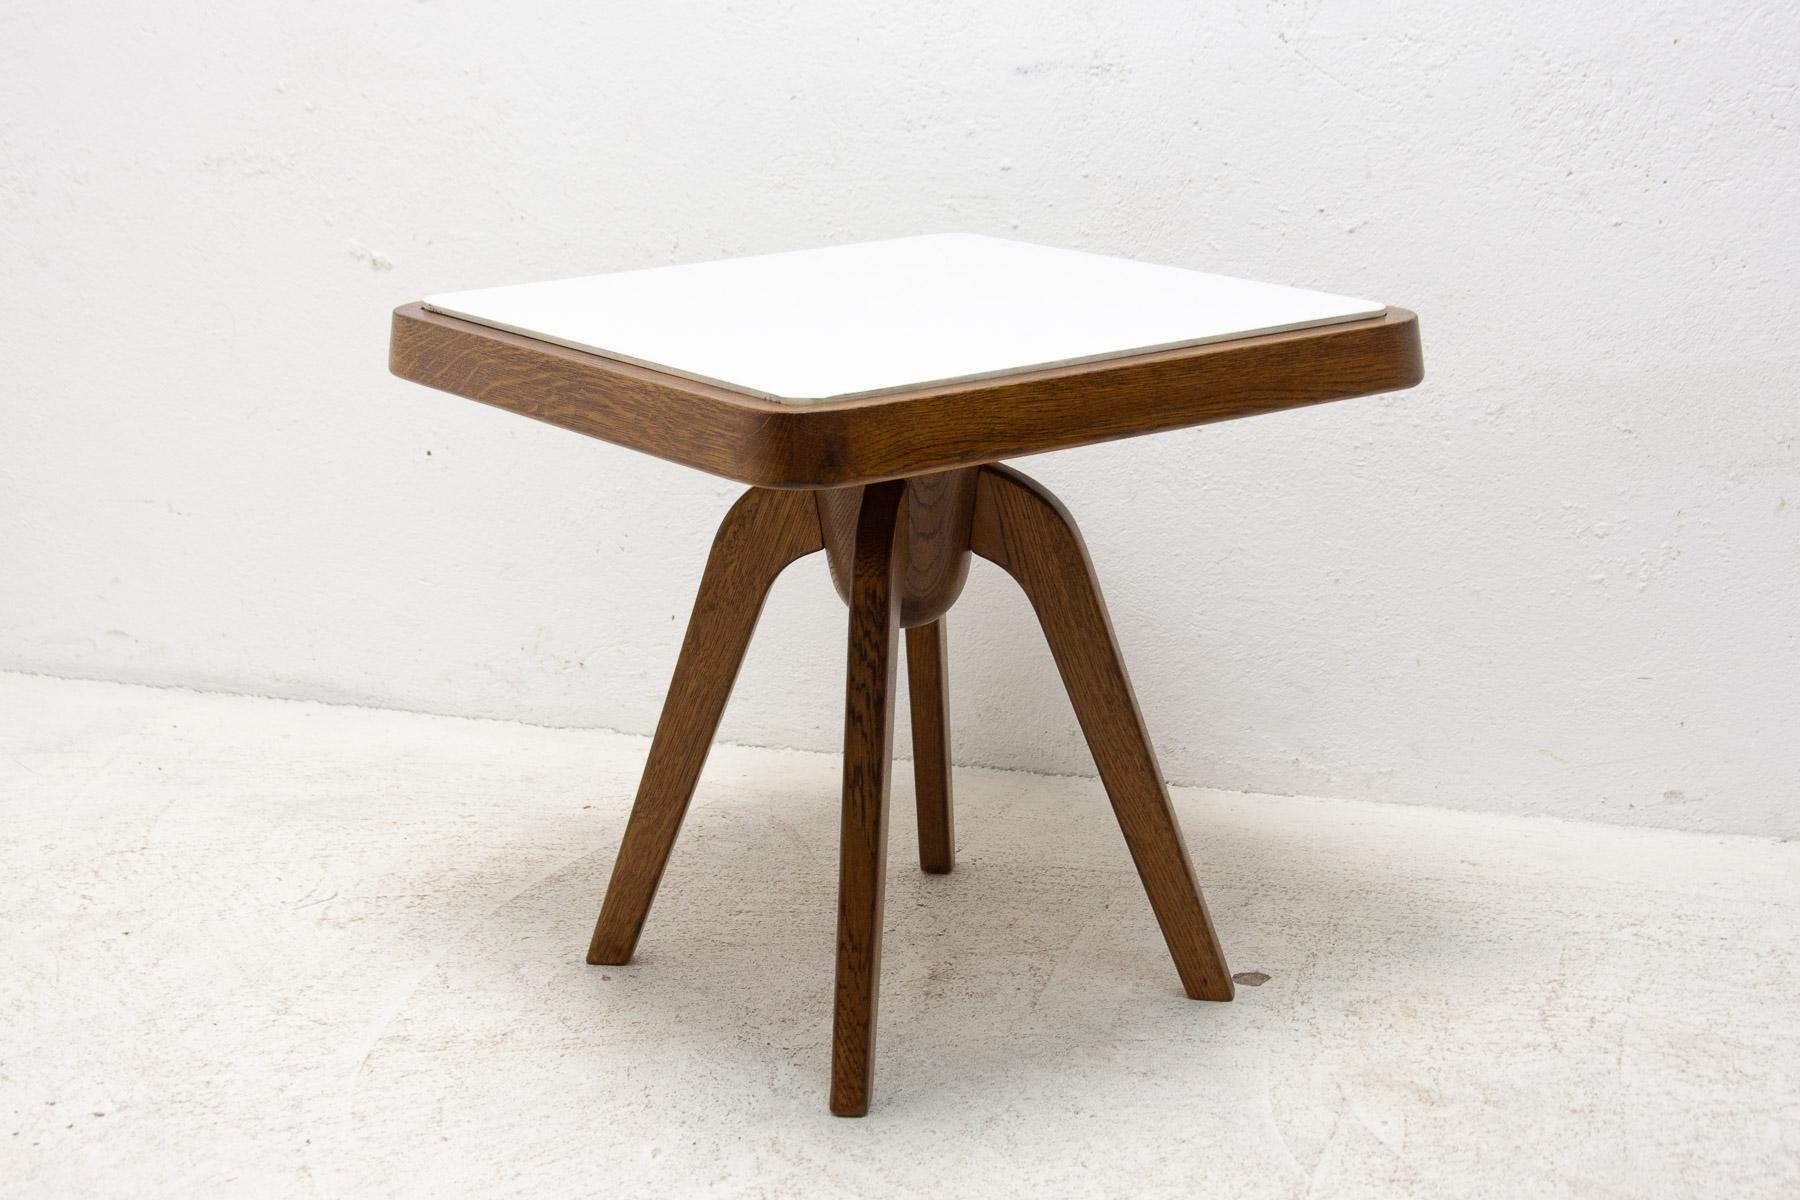 Mid century wooden stool or side table. Materials: milky glass, beechwood. Cool retro piece. In very good Vintage condition, showing slight signs of age and using.

Dimensions: 54 x 51 x 54 cm (WxHxD).